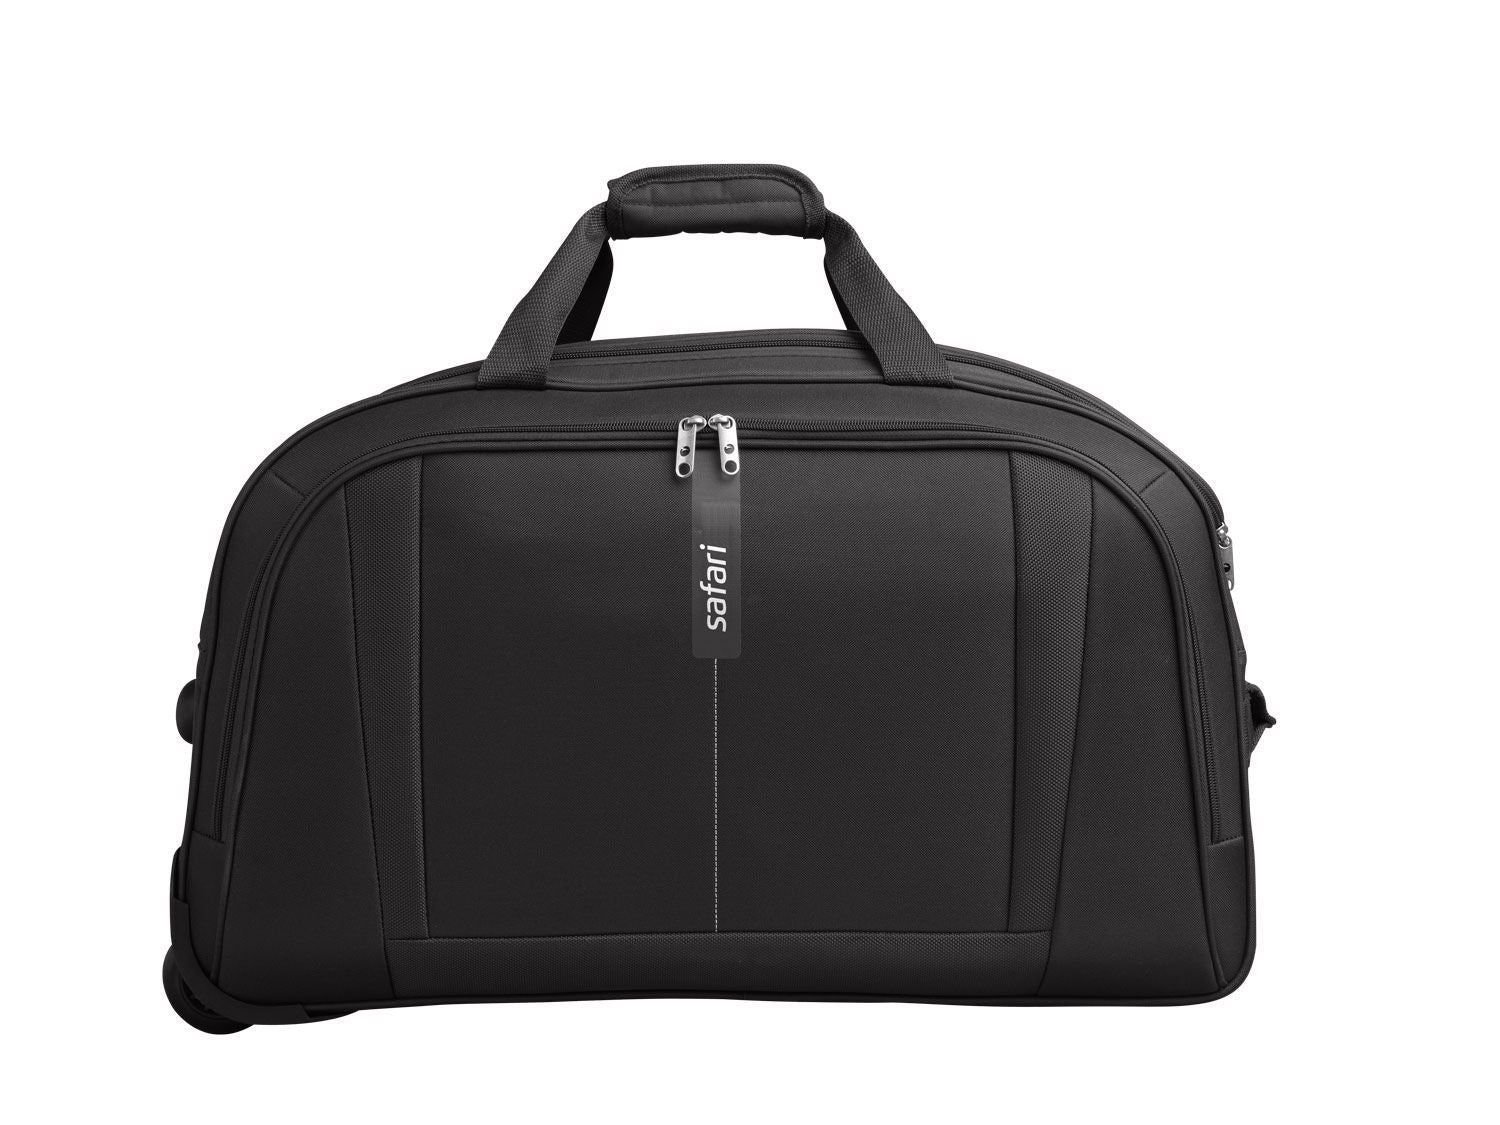 Aztec CP 65 Rolling Duffle with wheels